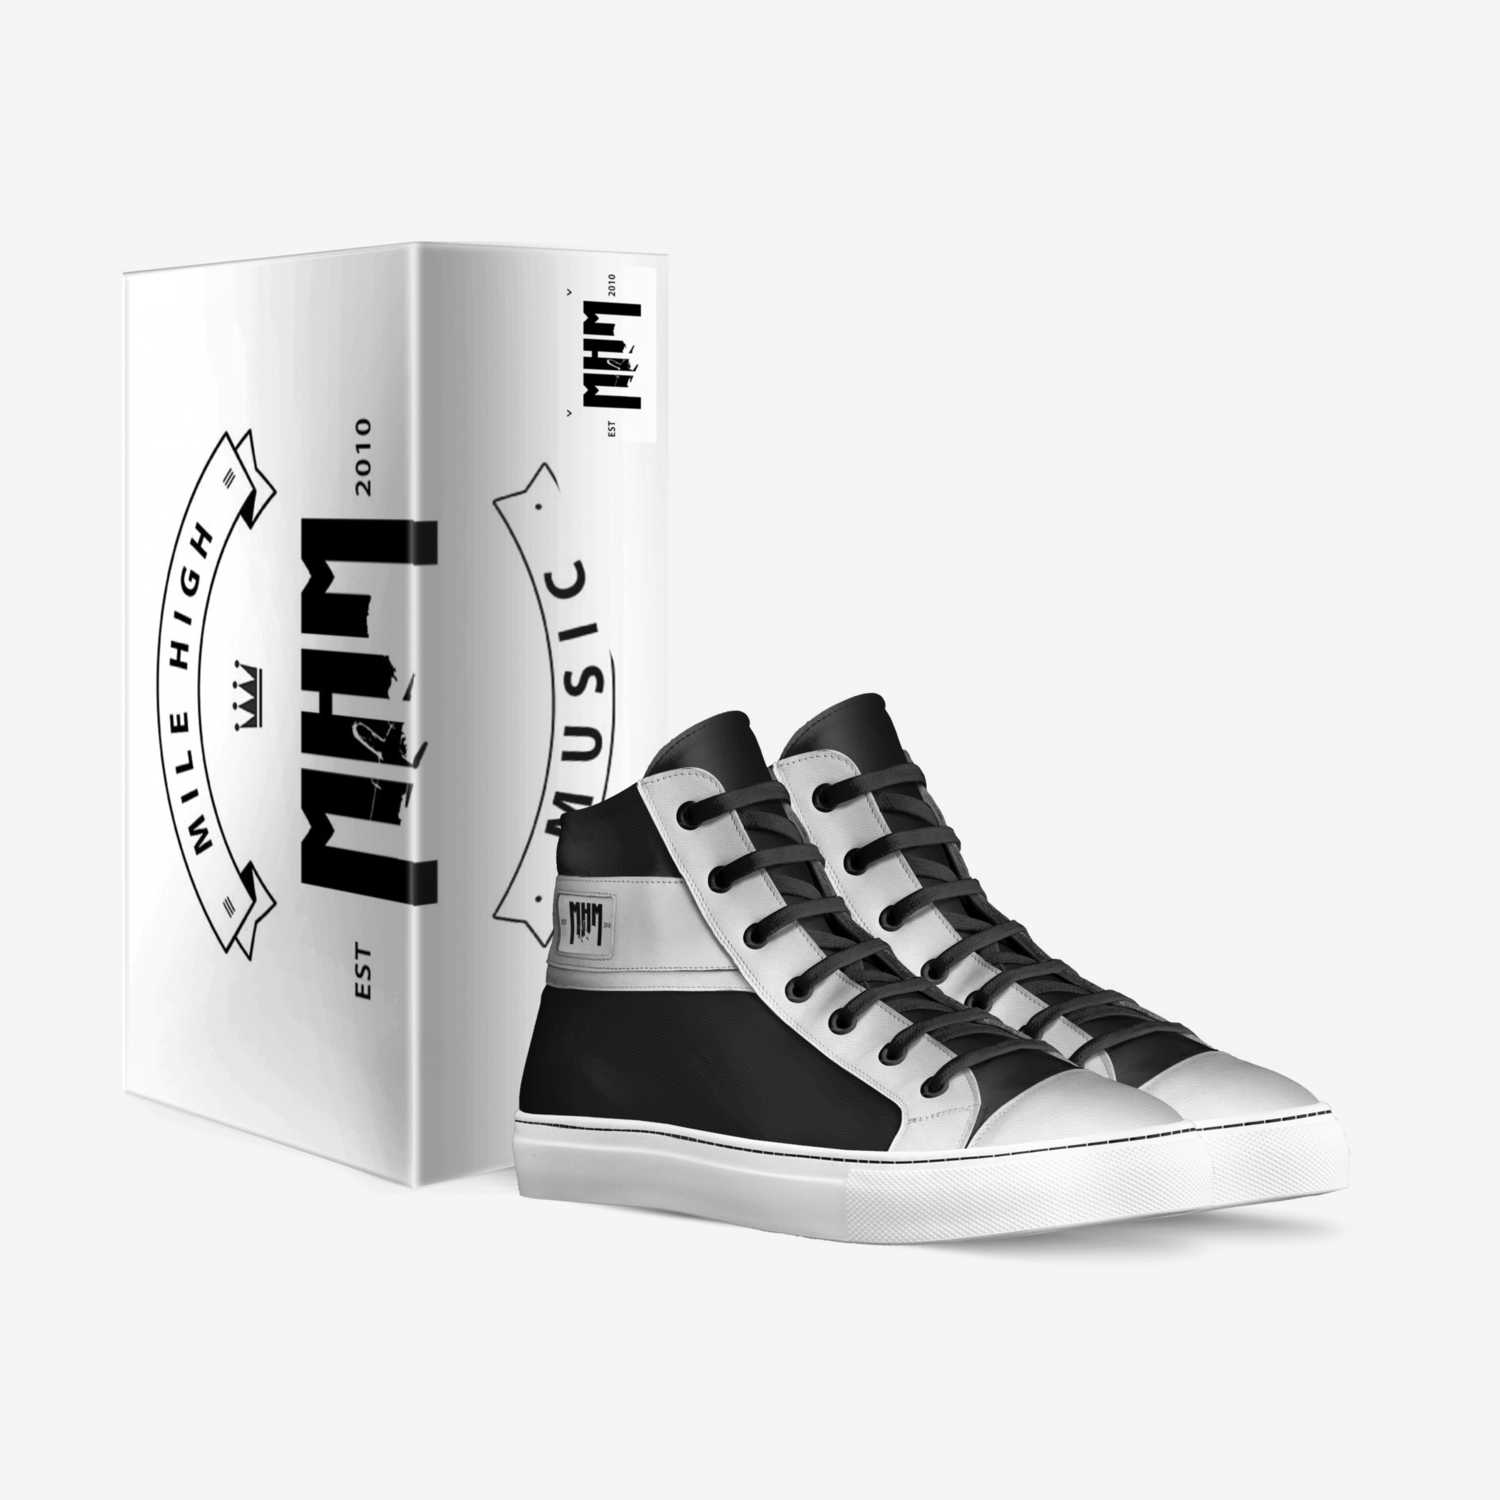 MH the lifestyle custom made in Italy shoes by Ralph Mclittle | Box view